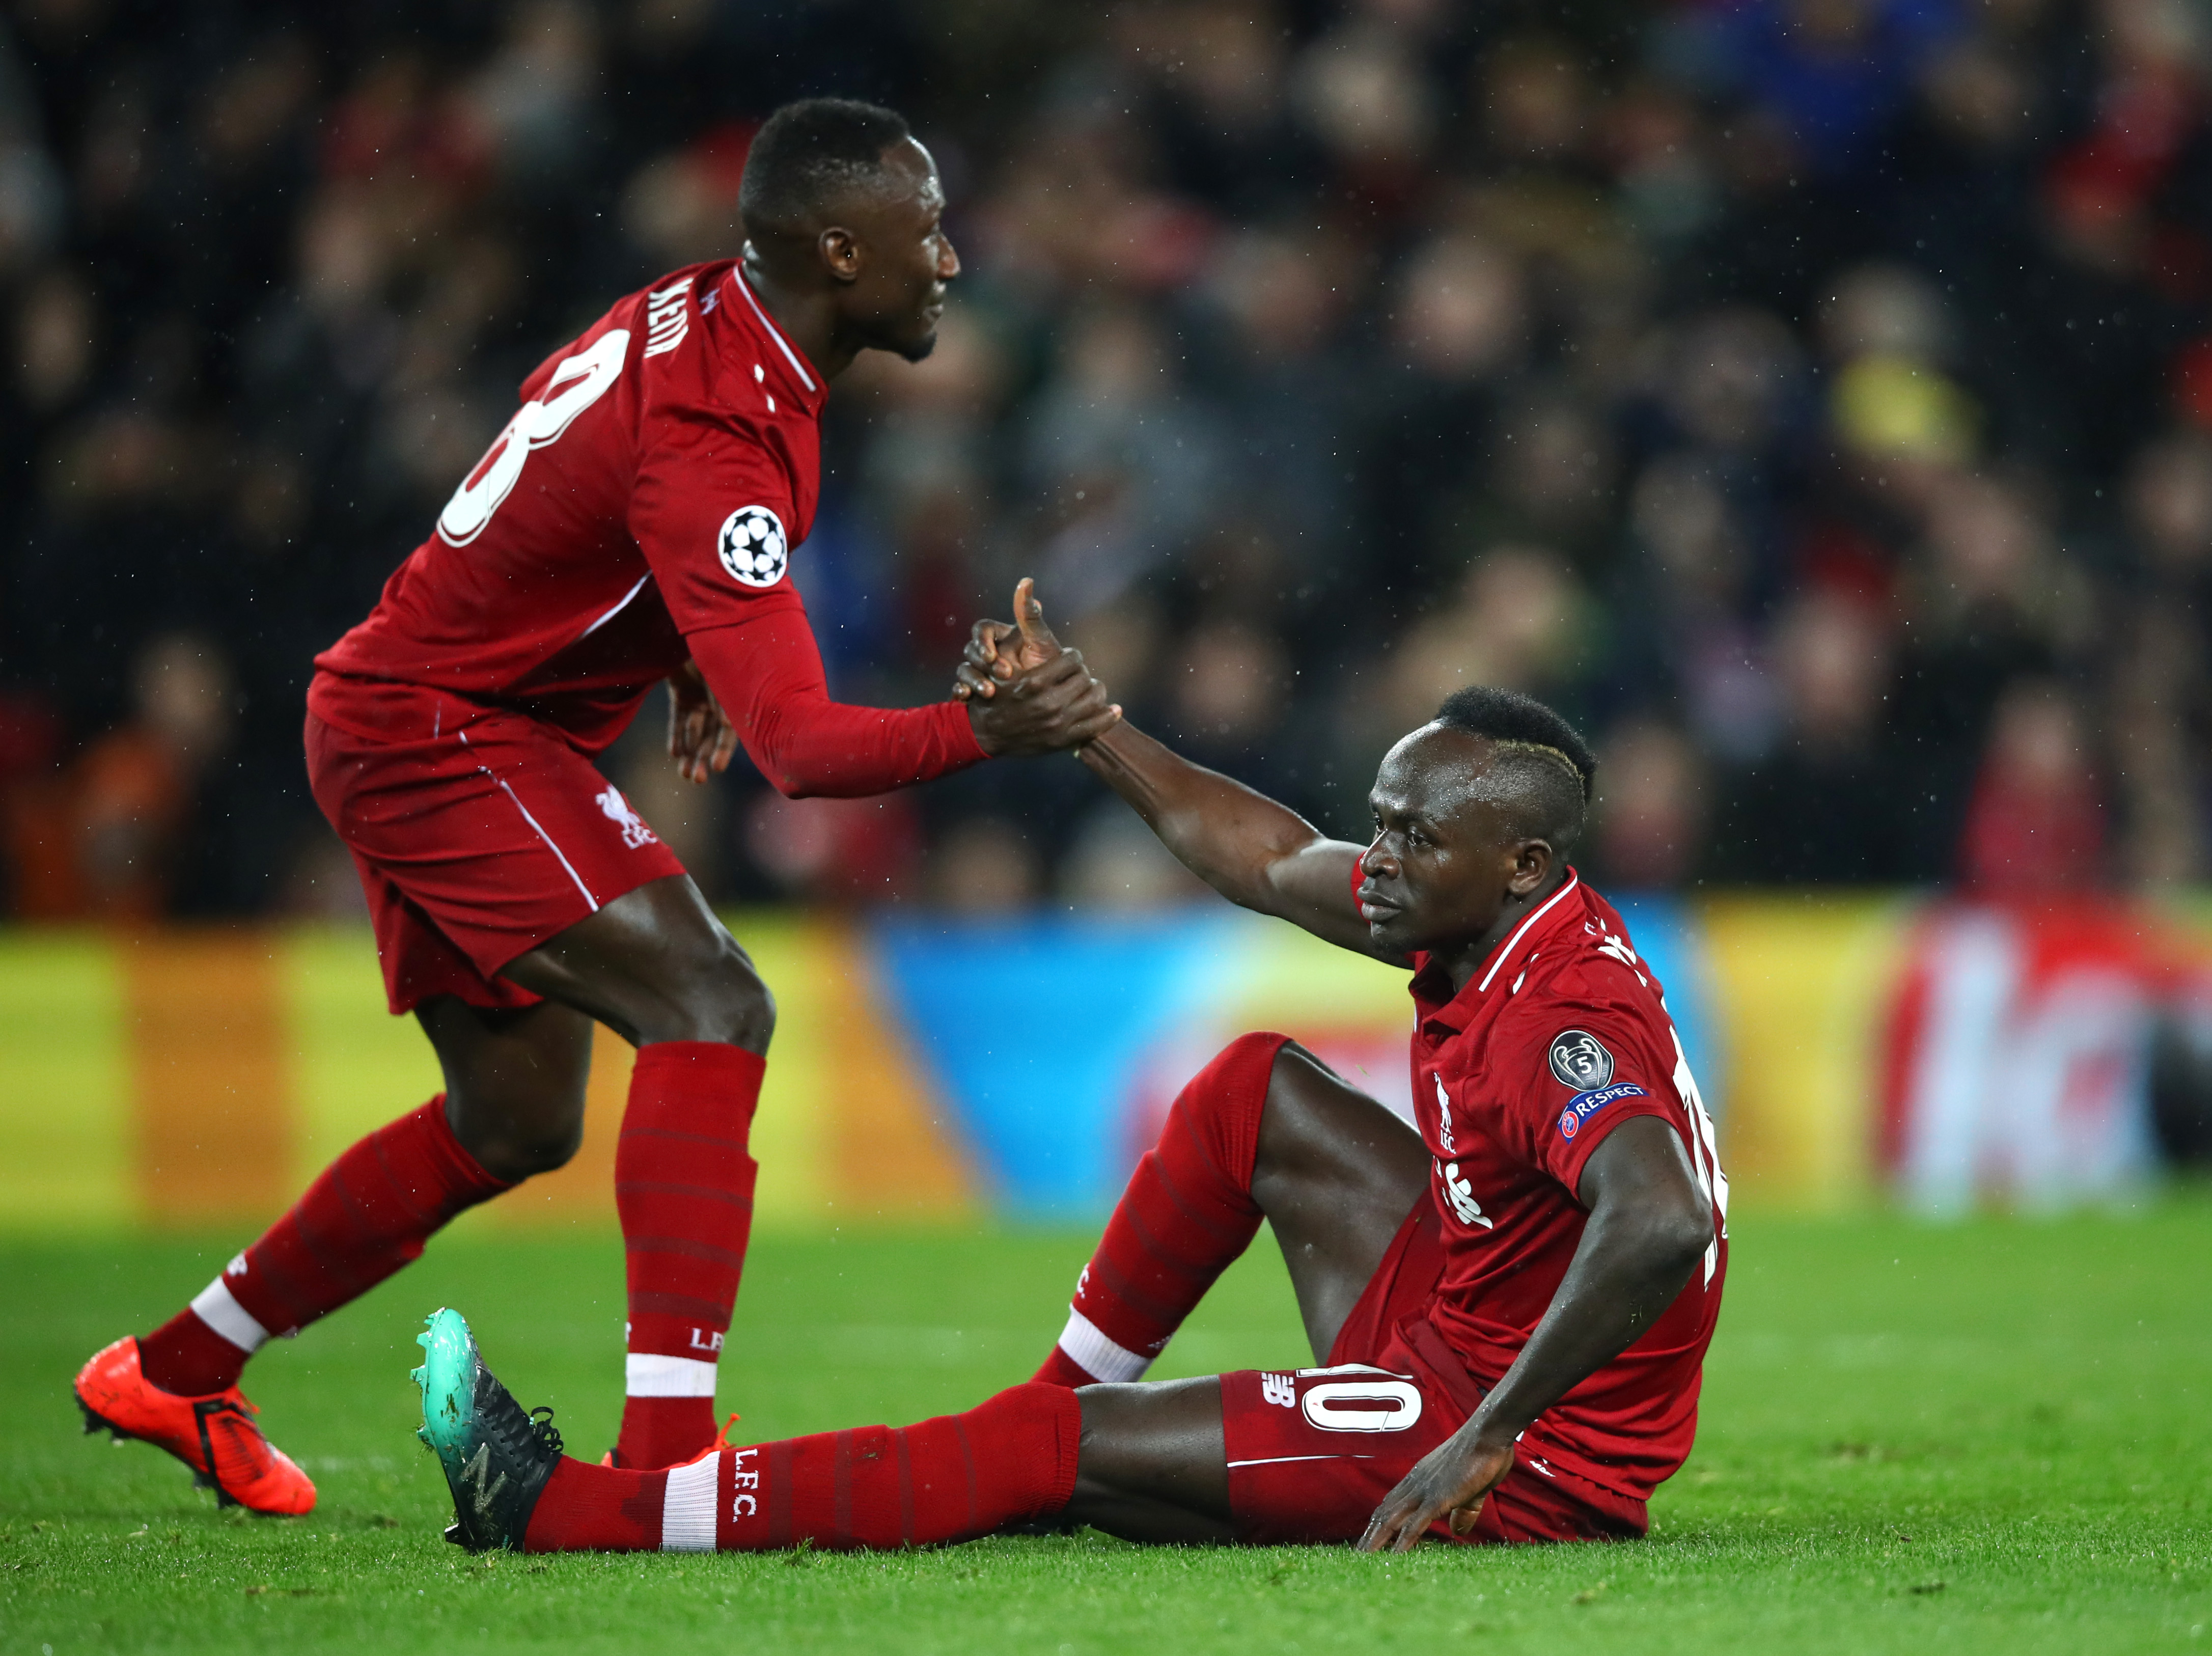 LIVERPOOL, ENGLAND - FEBRUARY 19:  Sadio Mane of Liverpool is assisted by team mate Naby Keita during the UEFA Champions League Round of 16 First Leg match between Liverpool and FC Bayern Muenchen at Anfield on February 19, 2019 in Liverpool, England. (Photo by Clive Brunskill/Getty Images)